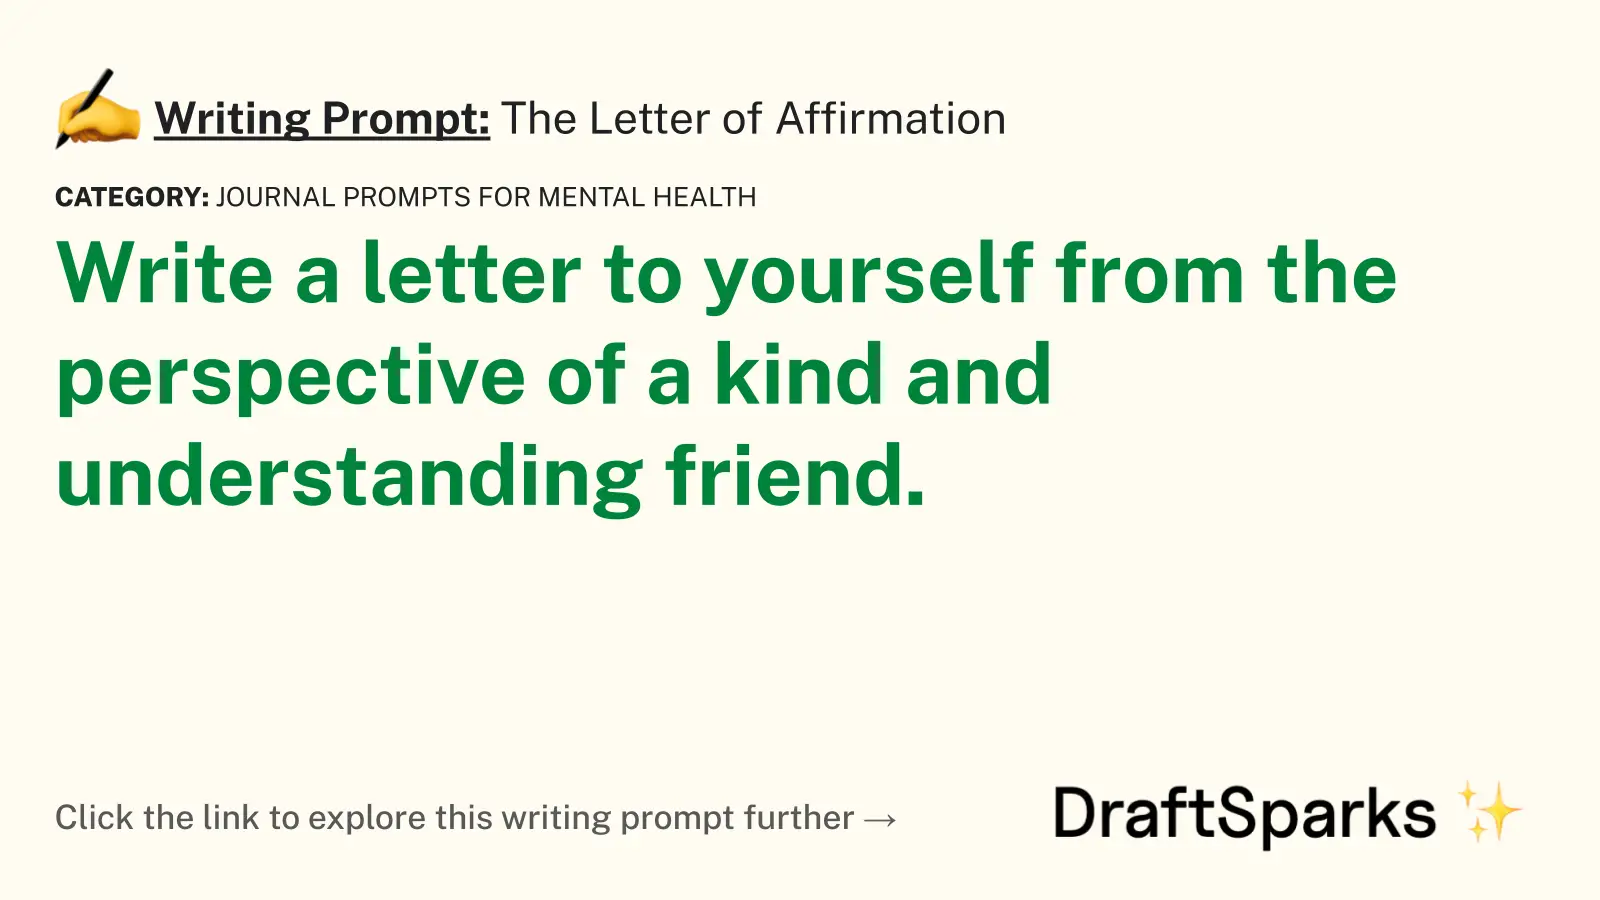 The Letter of Affirmation